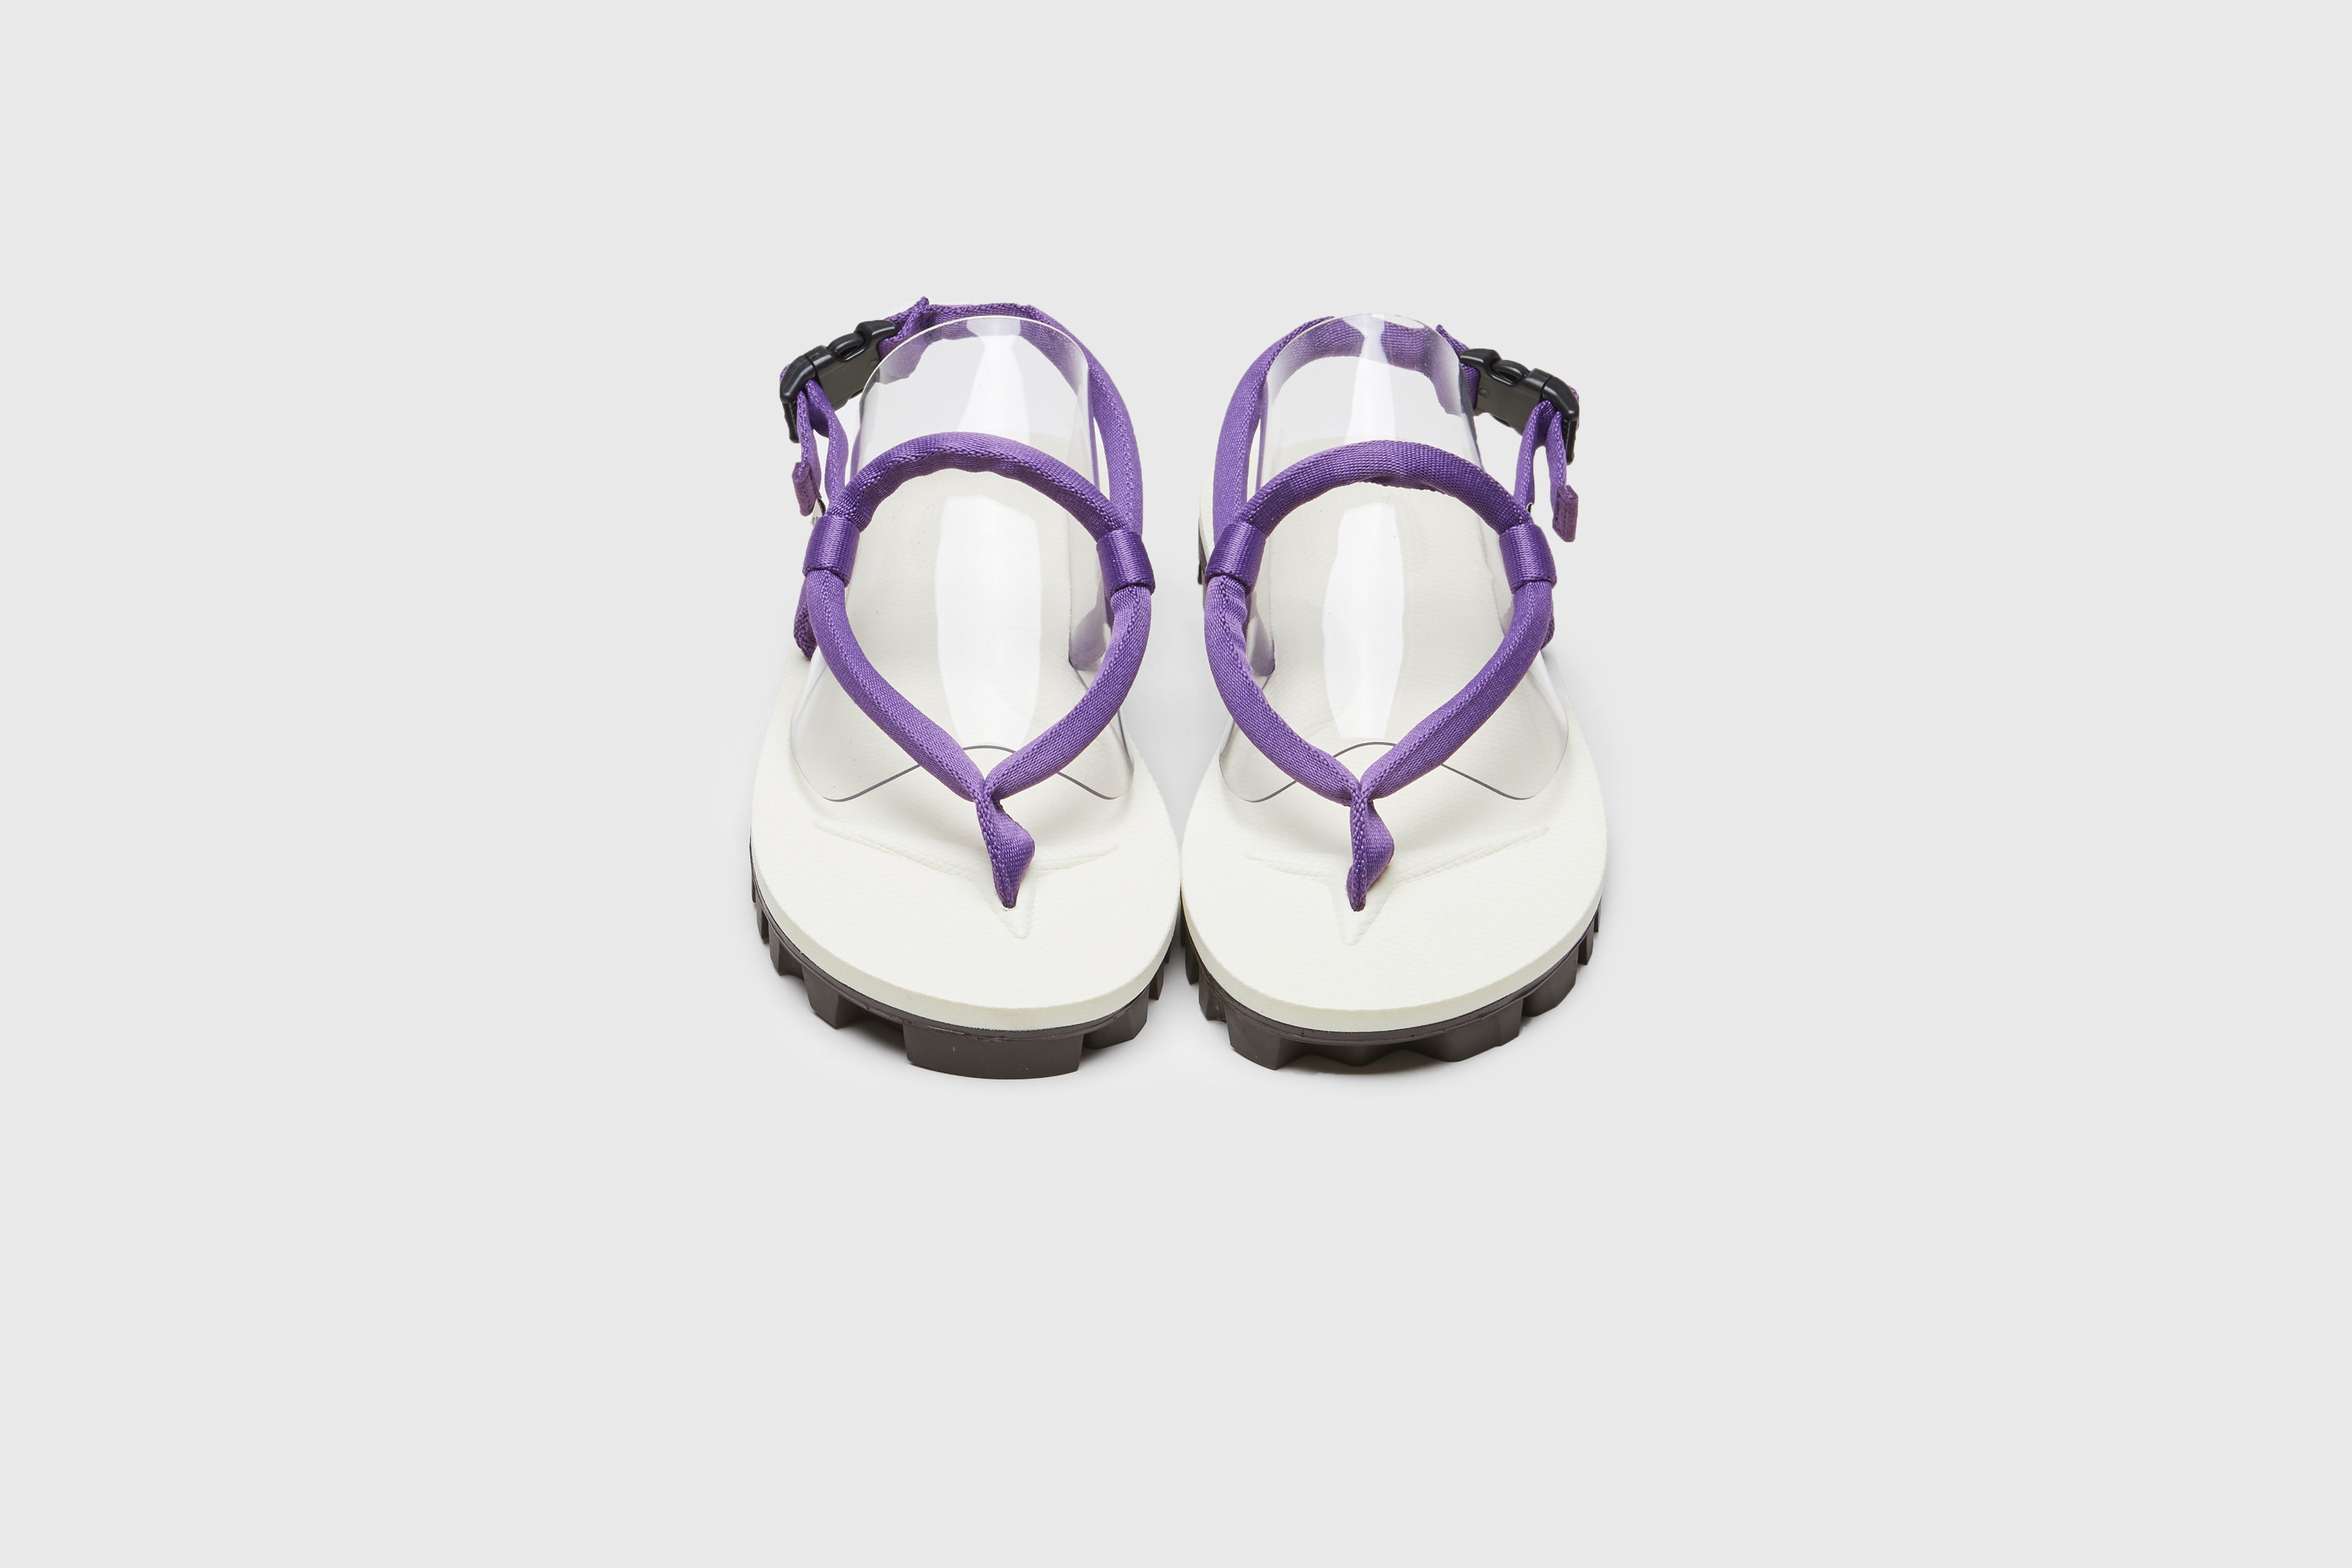 SUICOKE GUT sandals with purple & ivory nylon upper, purple & ivory midsole and sole, strap and logo patch. From Spring/Summer 2023 collection on eightywingold Web Store, an official partner of SUICOKE. OG-246 PURPLE X IVORY